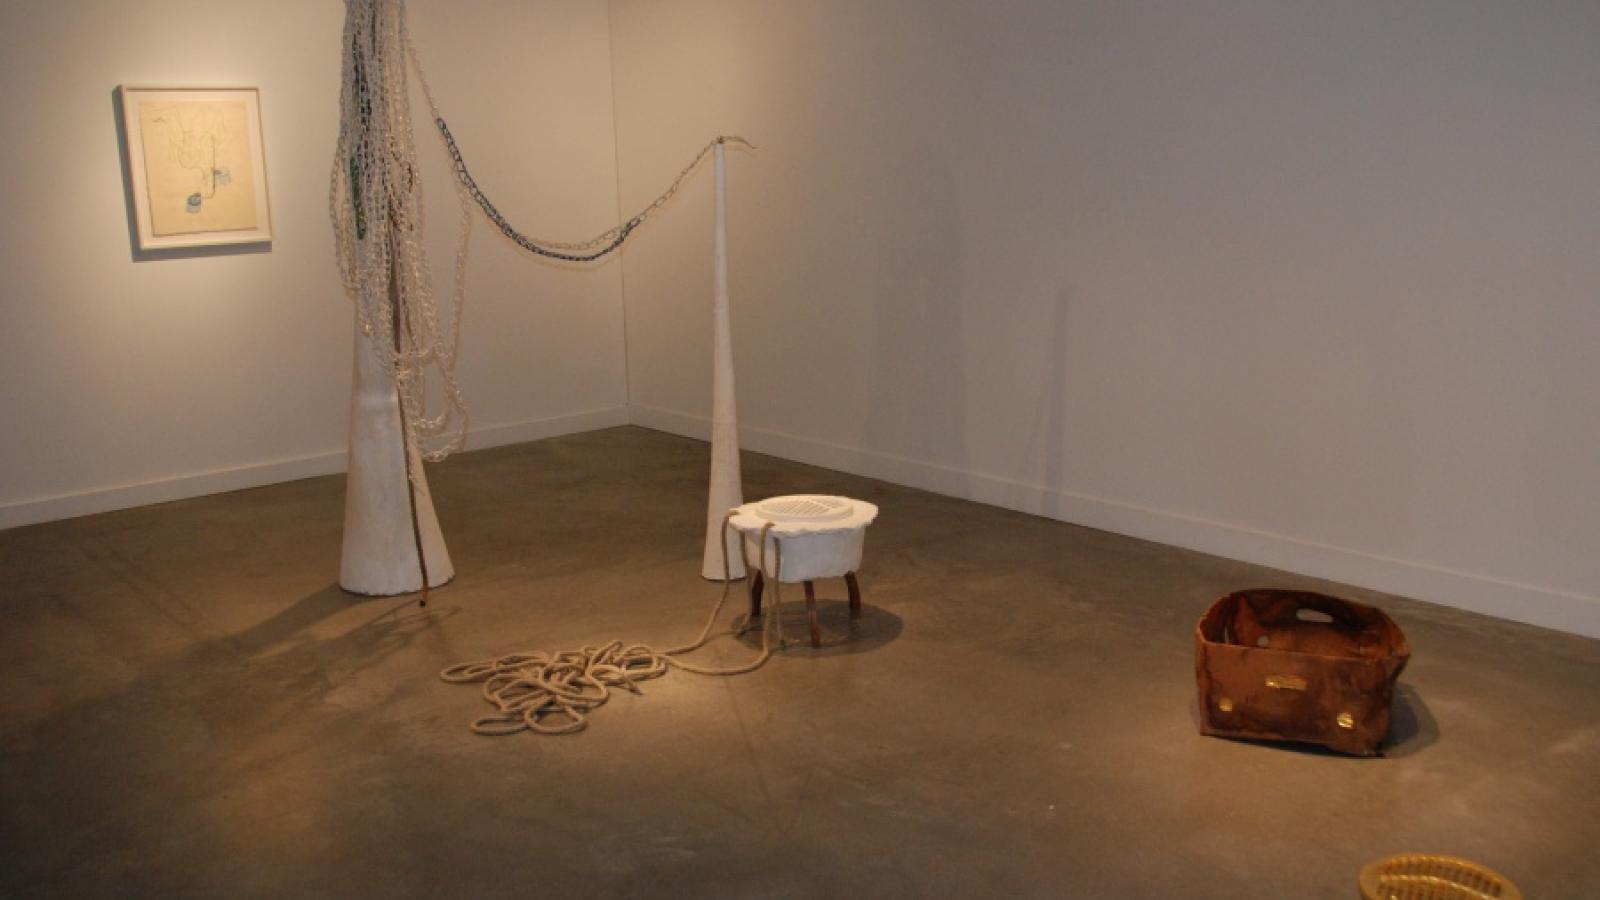 Untitled, collaborative sculpture piece with Candace Black, Installation view, Iosculation, Urban Arts Space, 2012